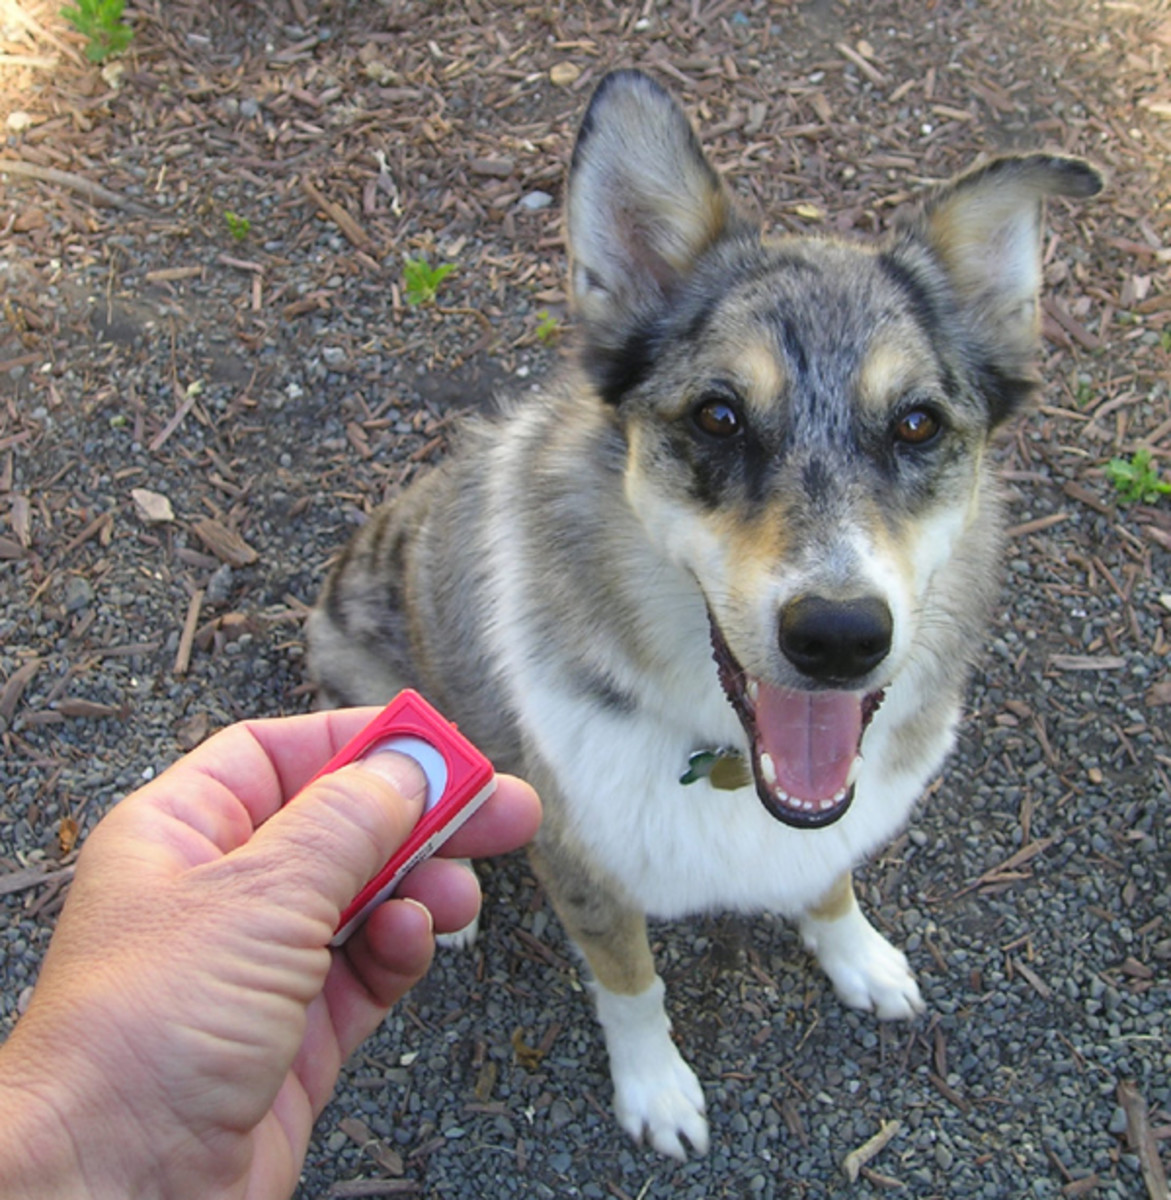 Clicker training can be a useful potty-training method.